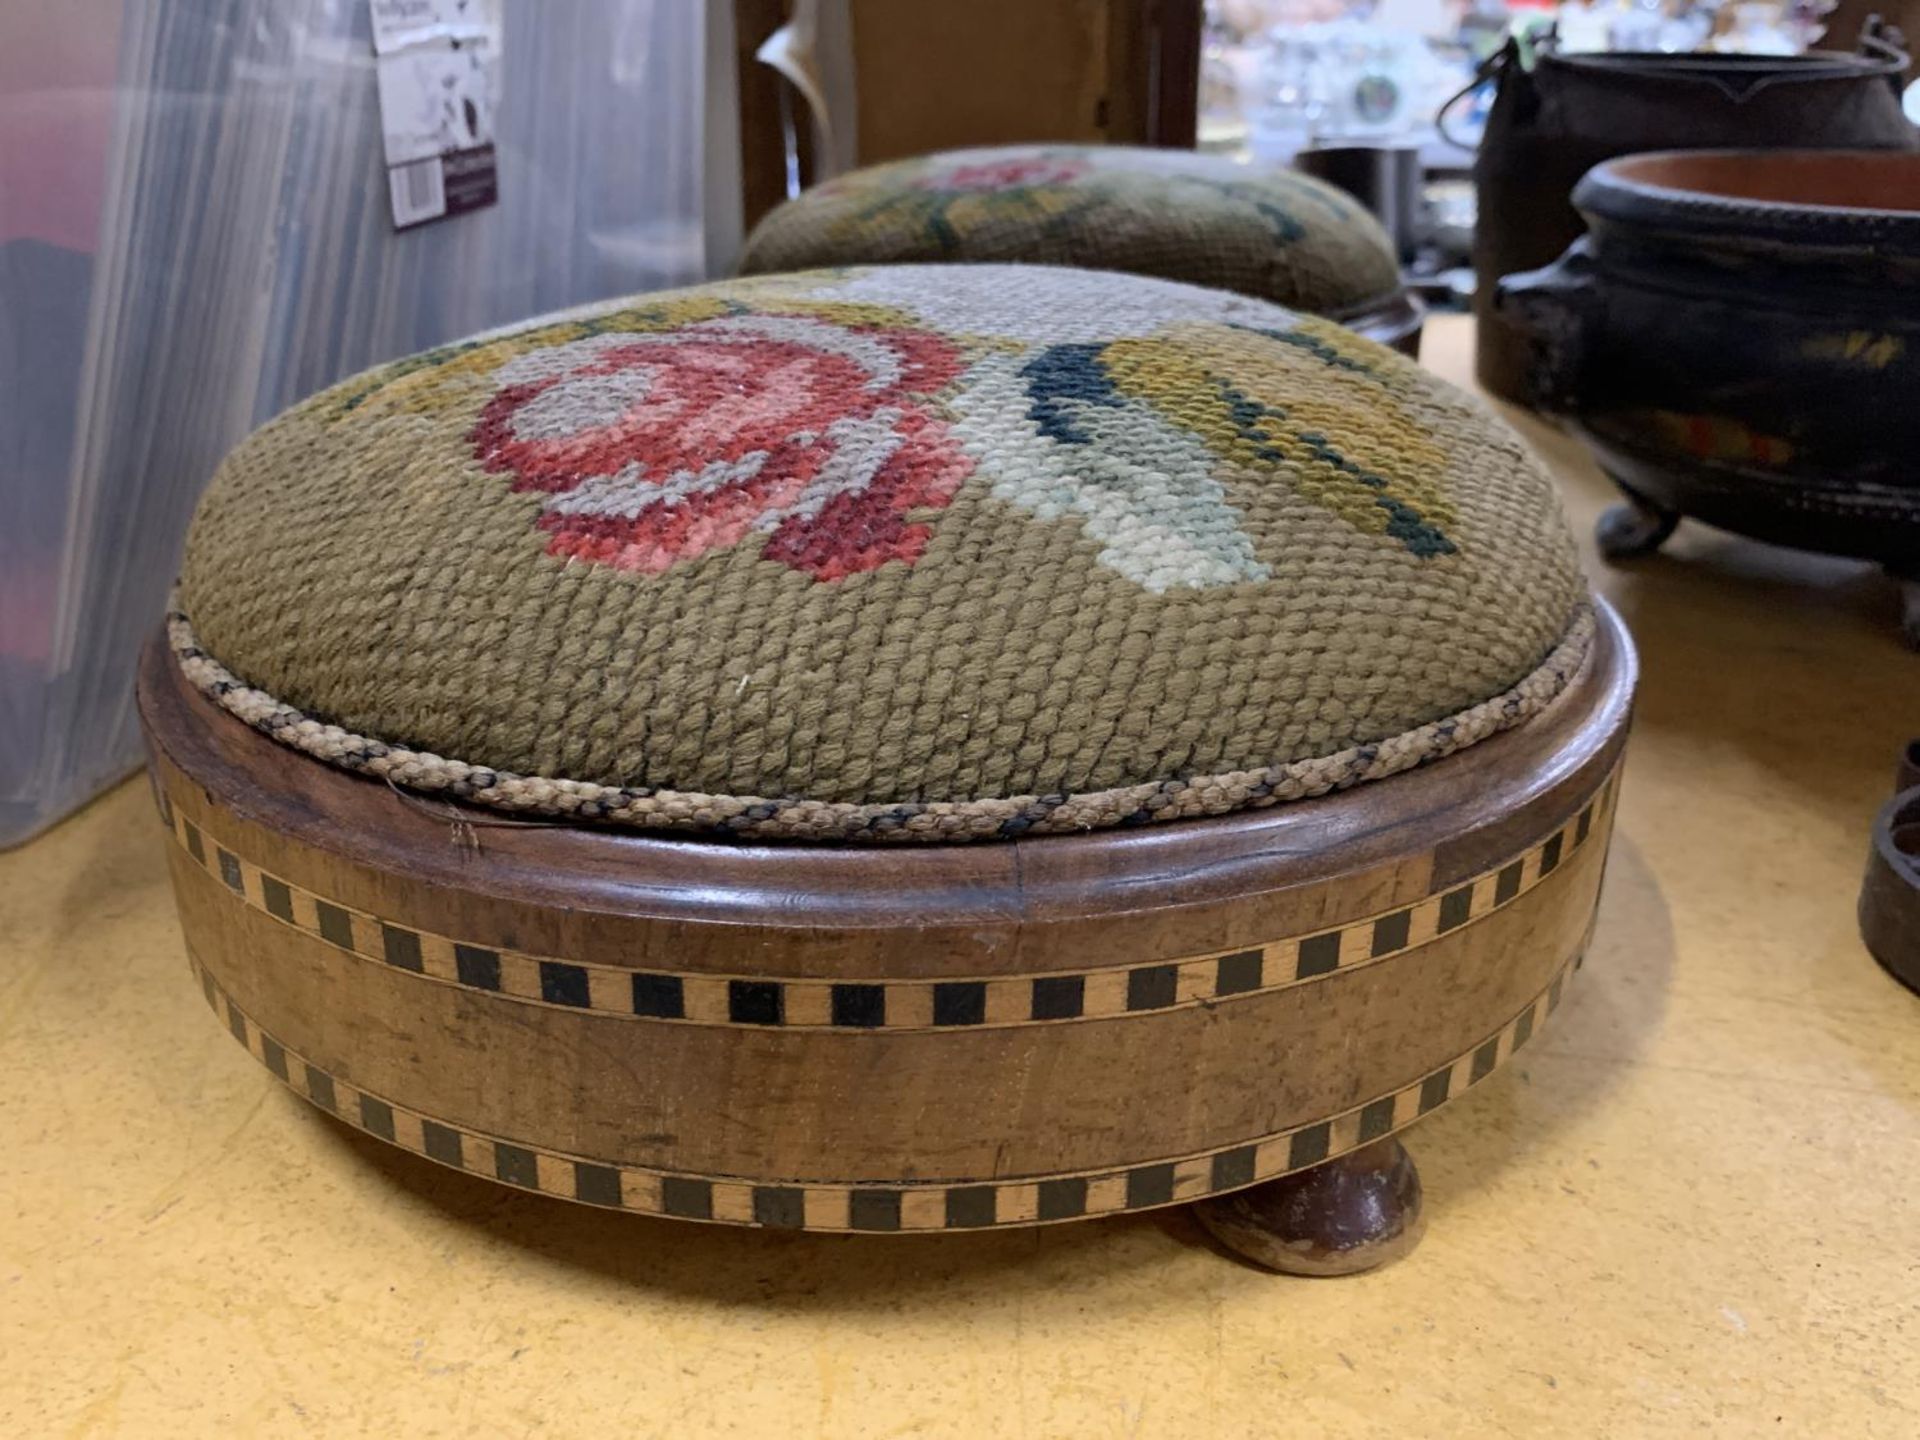 TWO VINTAGE FOOTSTOOLS WITH INLAID BANDING AND TAPESTRY TOPS - Image 2 of 3